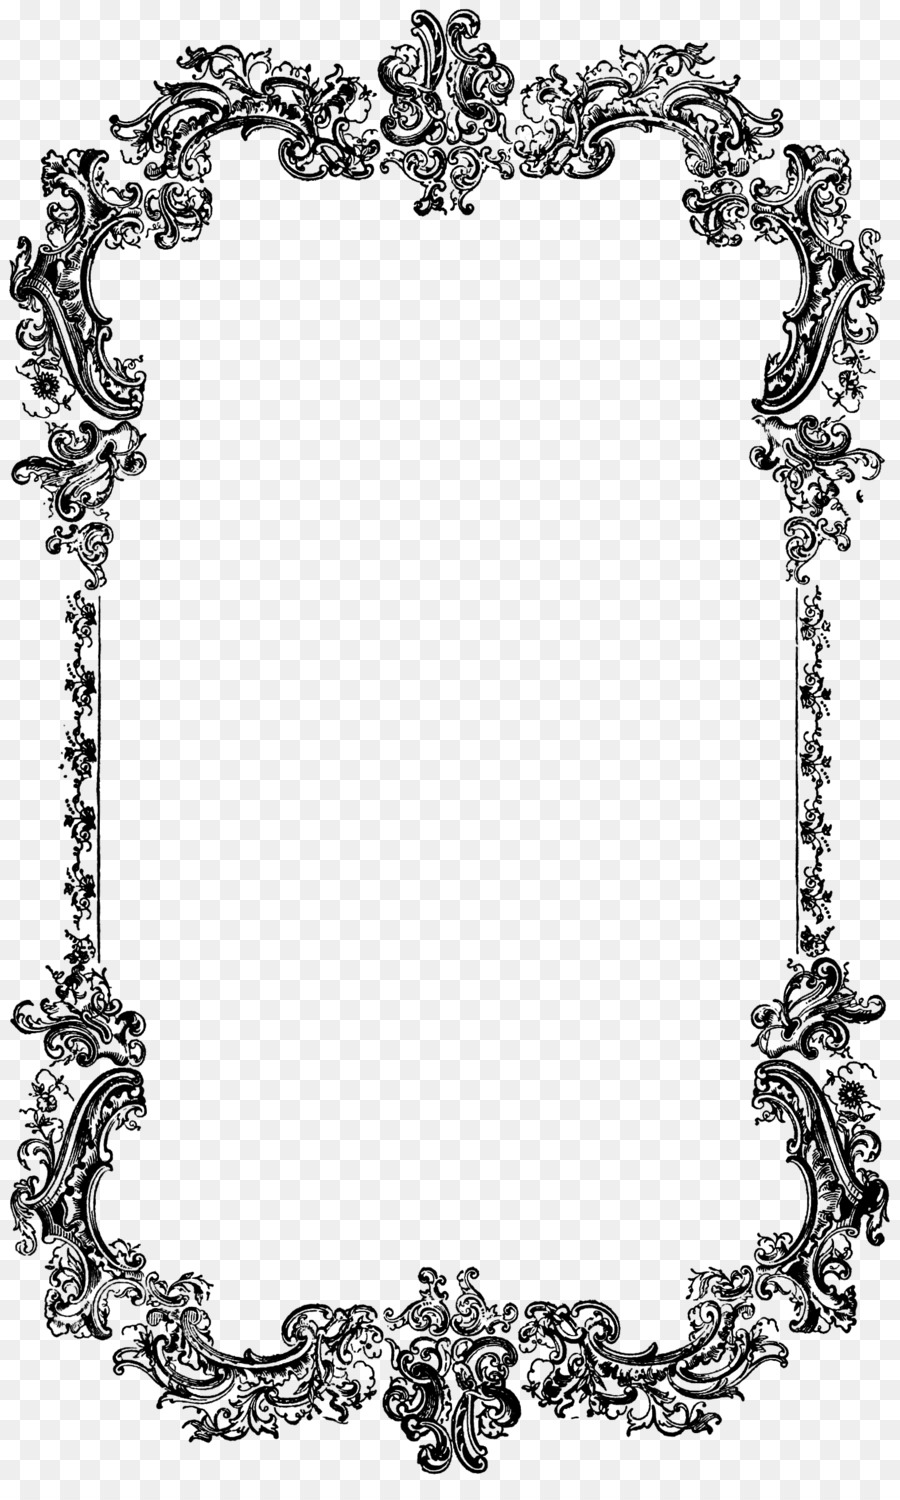 Borders and Frames Free content Clip art - Decoration Border Cliparts png download - 1569*2585 - Free Transparent BORDERS AND FRAMES png Download.